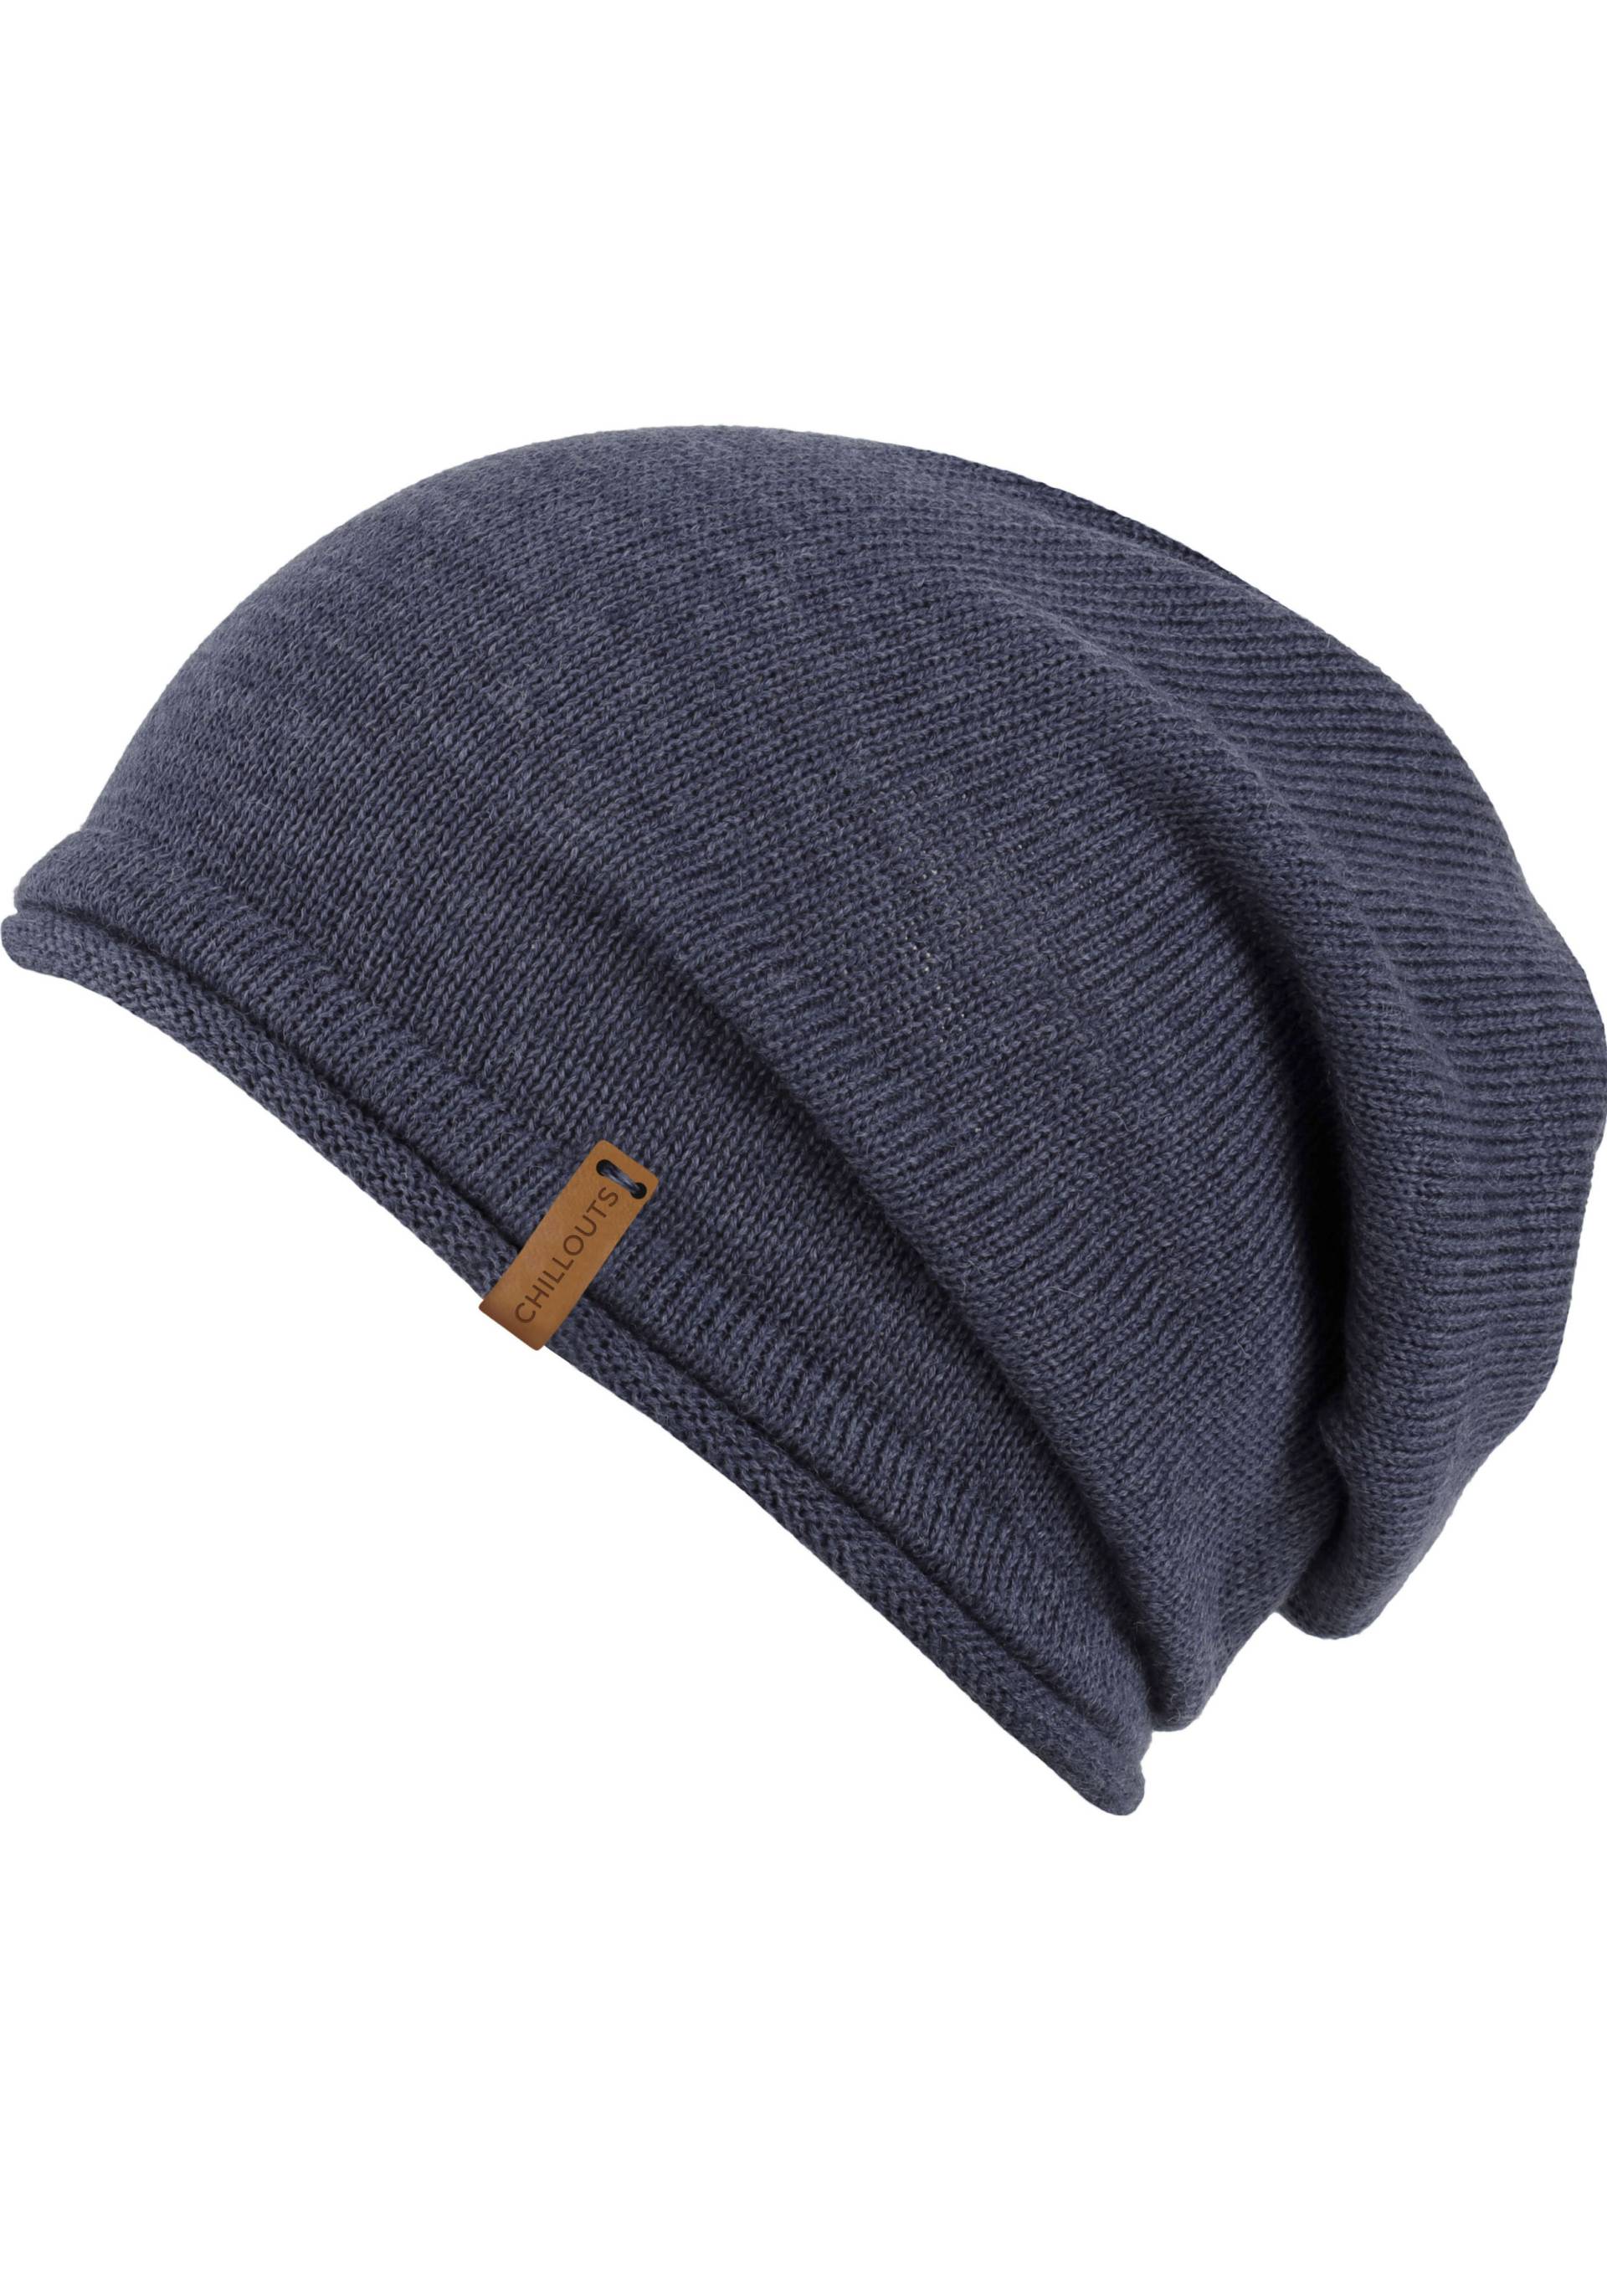 chillouts Beanie »Leicester Hat« von chillouts